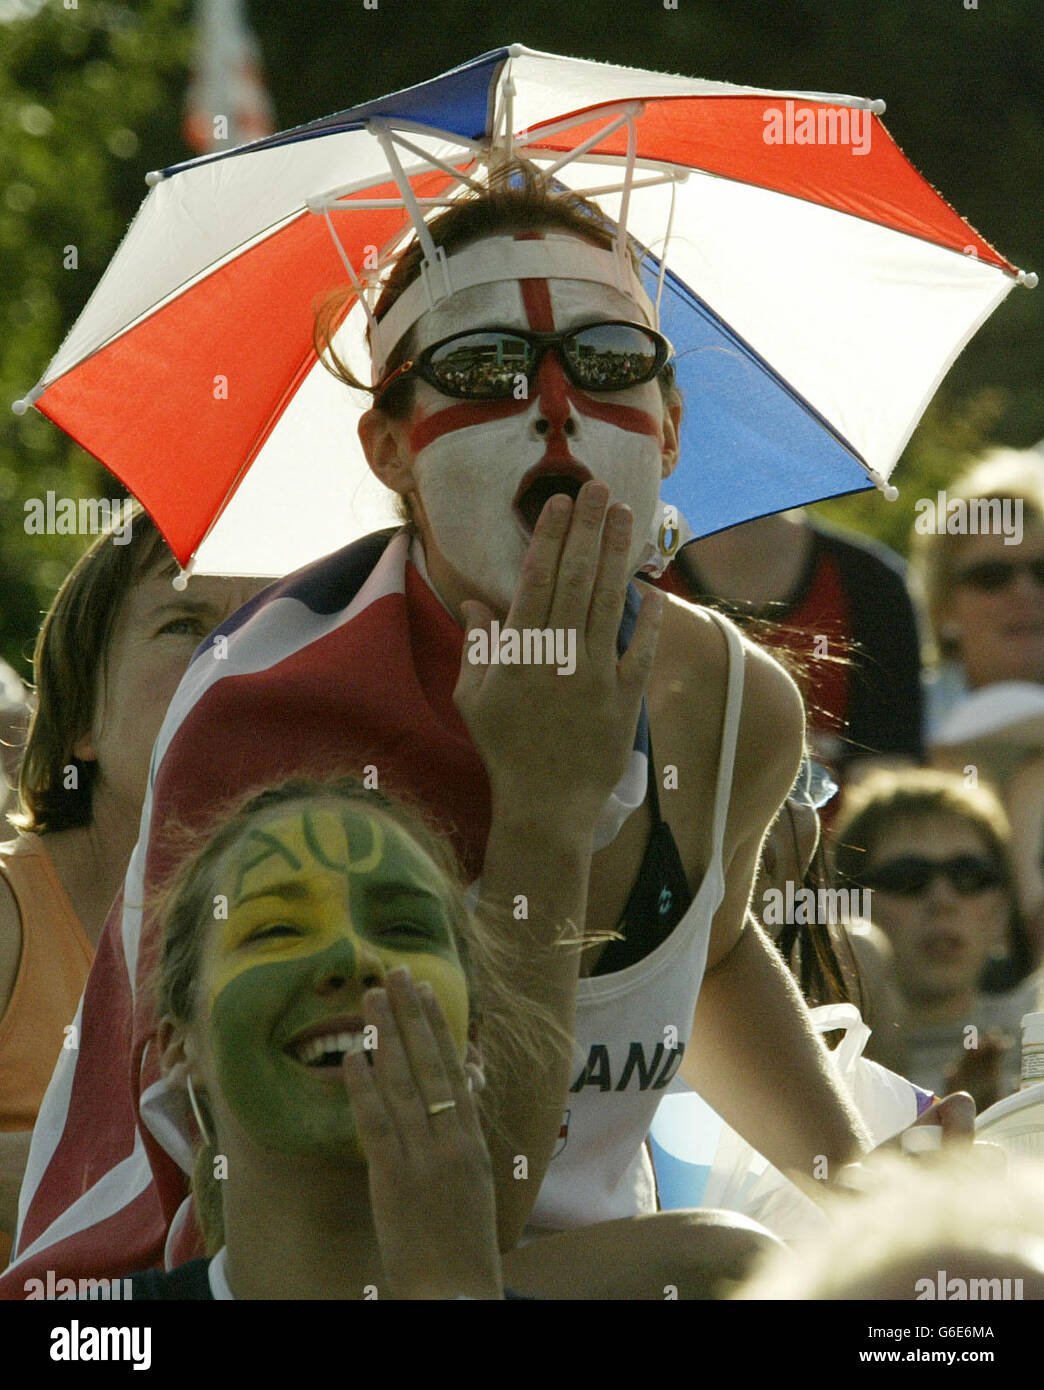 EDITORIAL USE ONLY, NO MOBILE PHONE USE. Tennis fans cheer on Britain's Greg Rusedski and Andy Roddick of the USA from 'Rusedski Ridge' as they play on Centre Court at the All England Lawn Tennis Championships in Wimbledon. Stock Photo